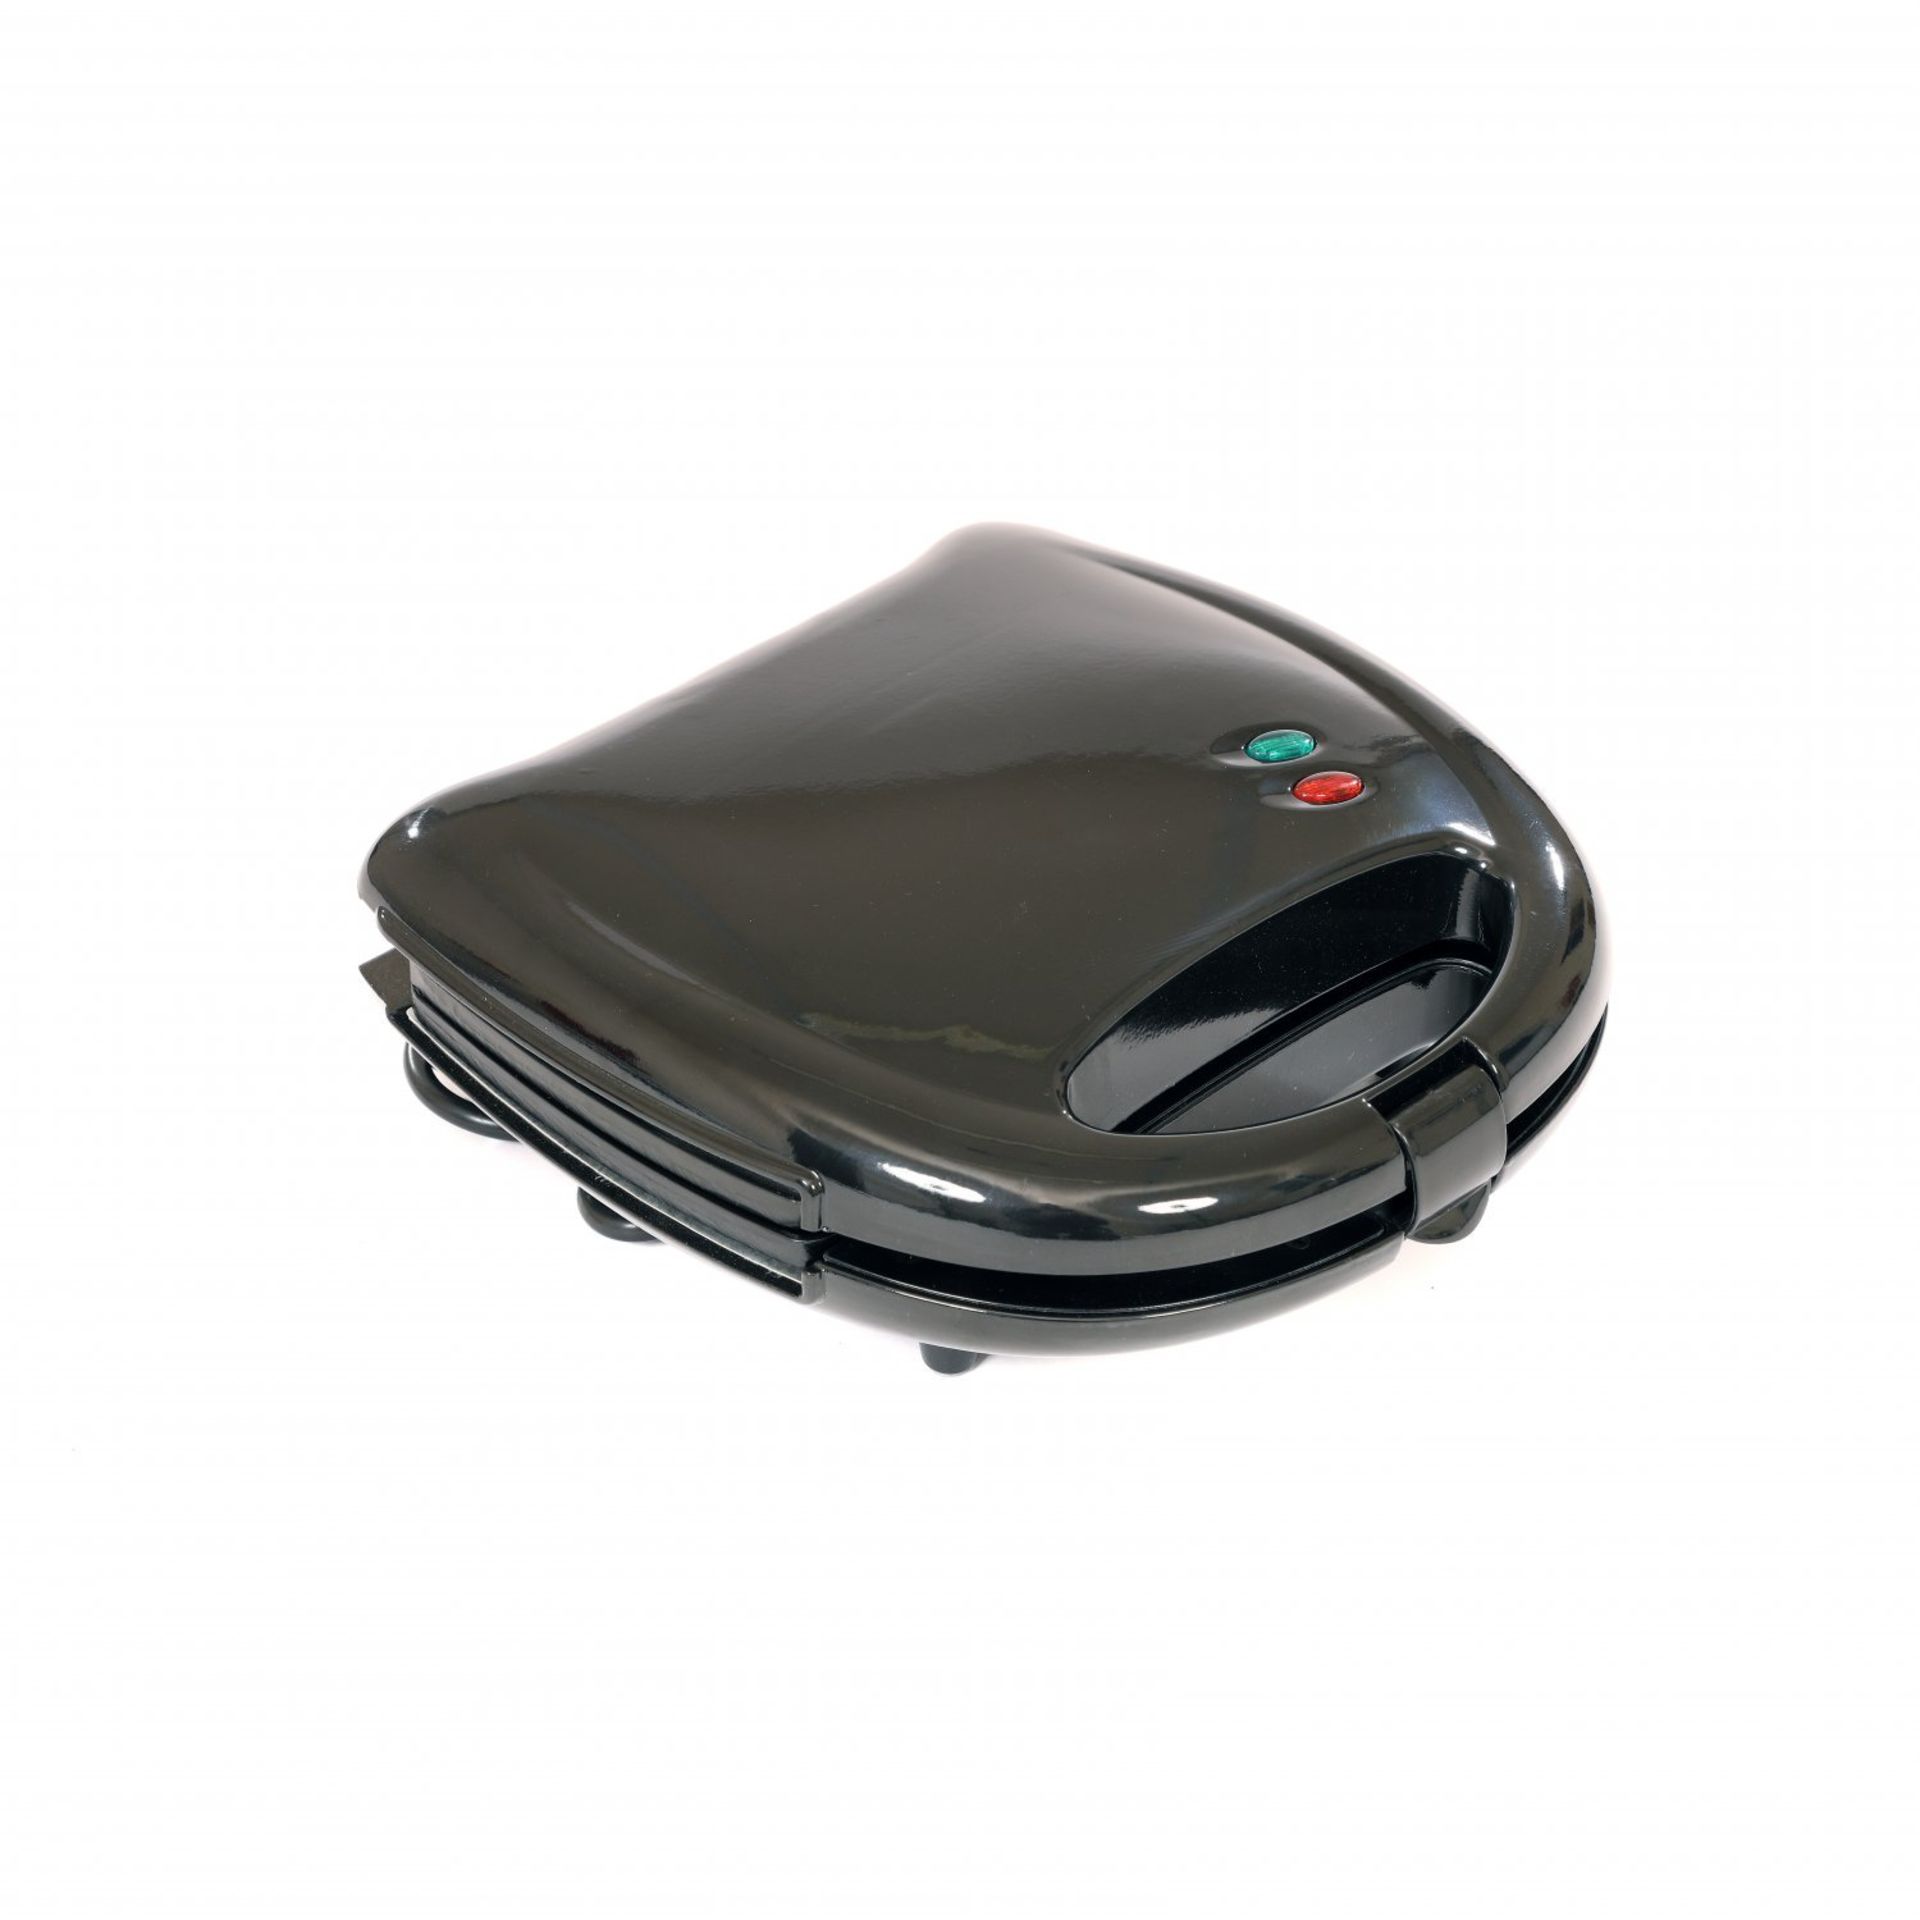 (PP513) 3-in-1 750W Toasted Sandwich Panini Waffle Maker Contact Grill The sandwich maker ... - Image 2 of 2